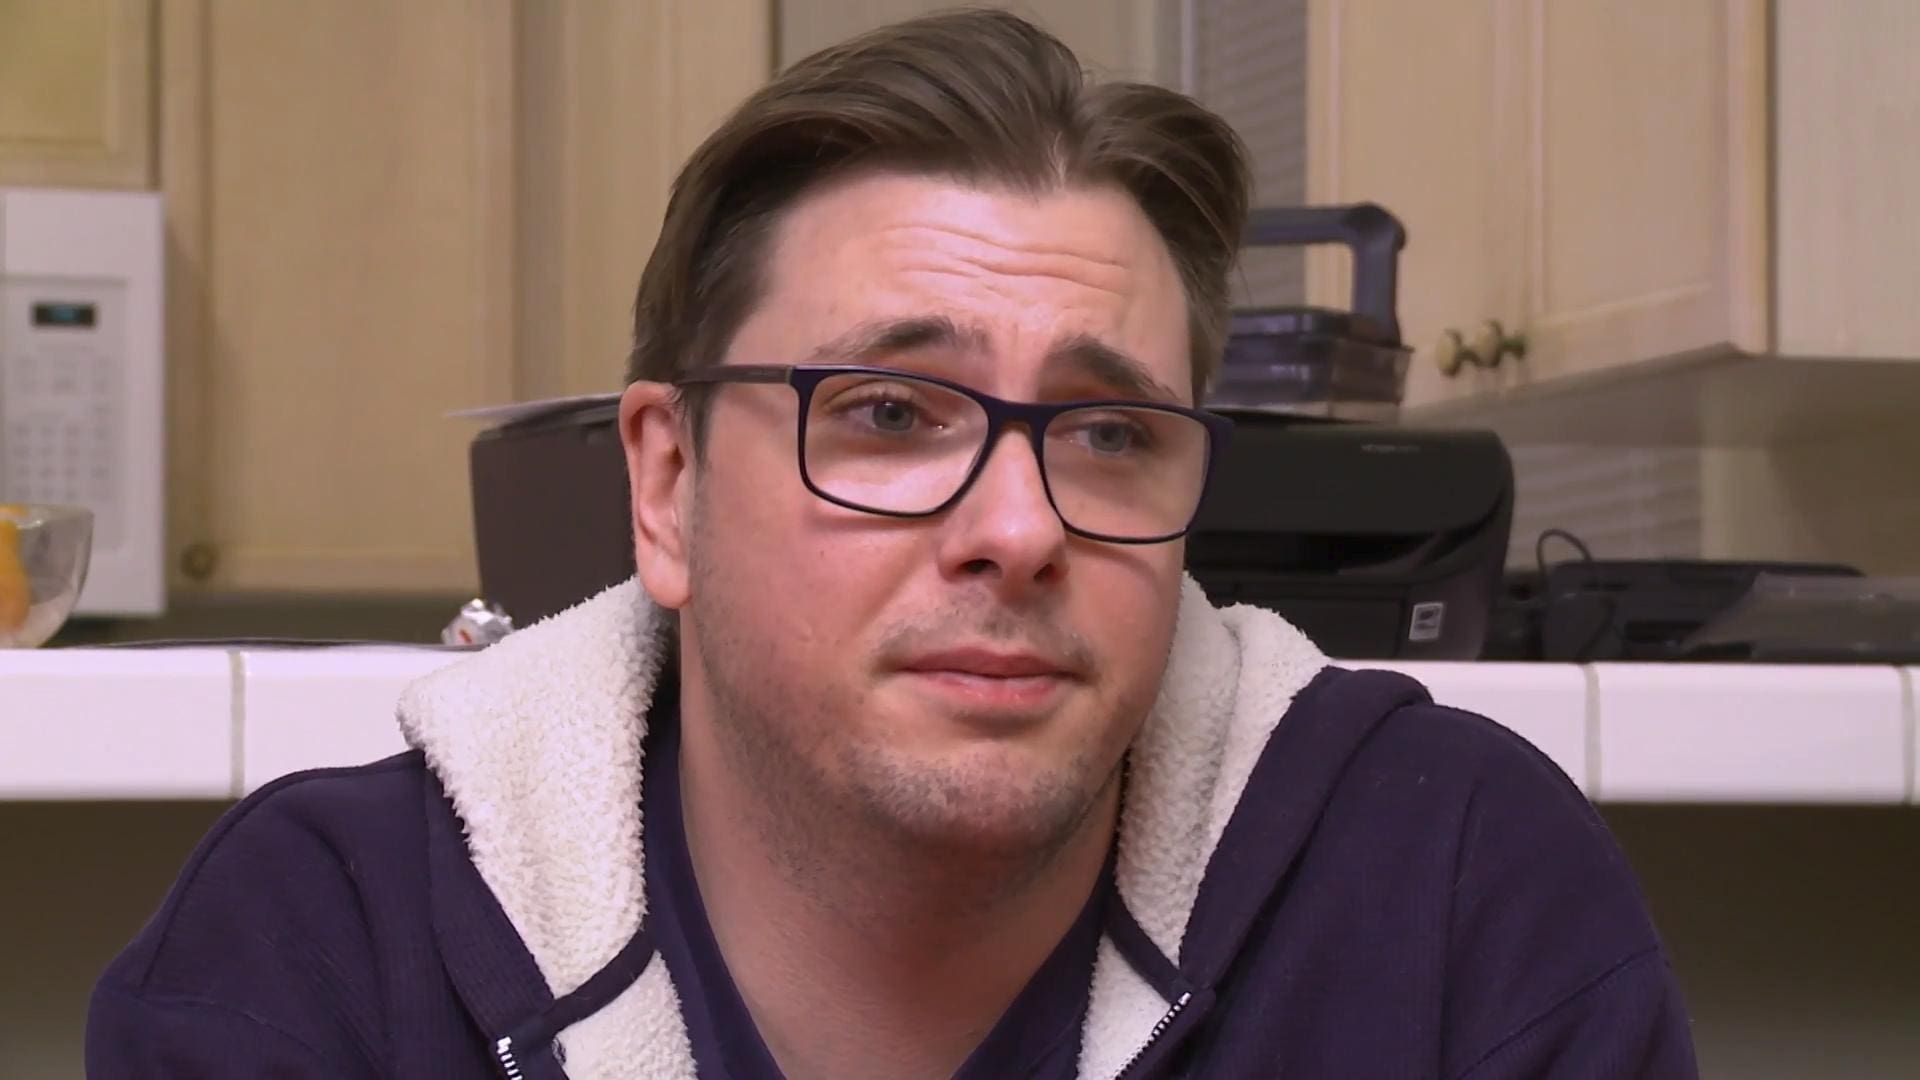 90 Day Fiancé: Happily Ever After? background